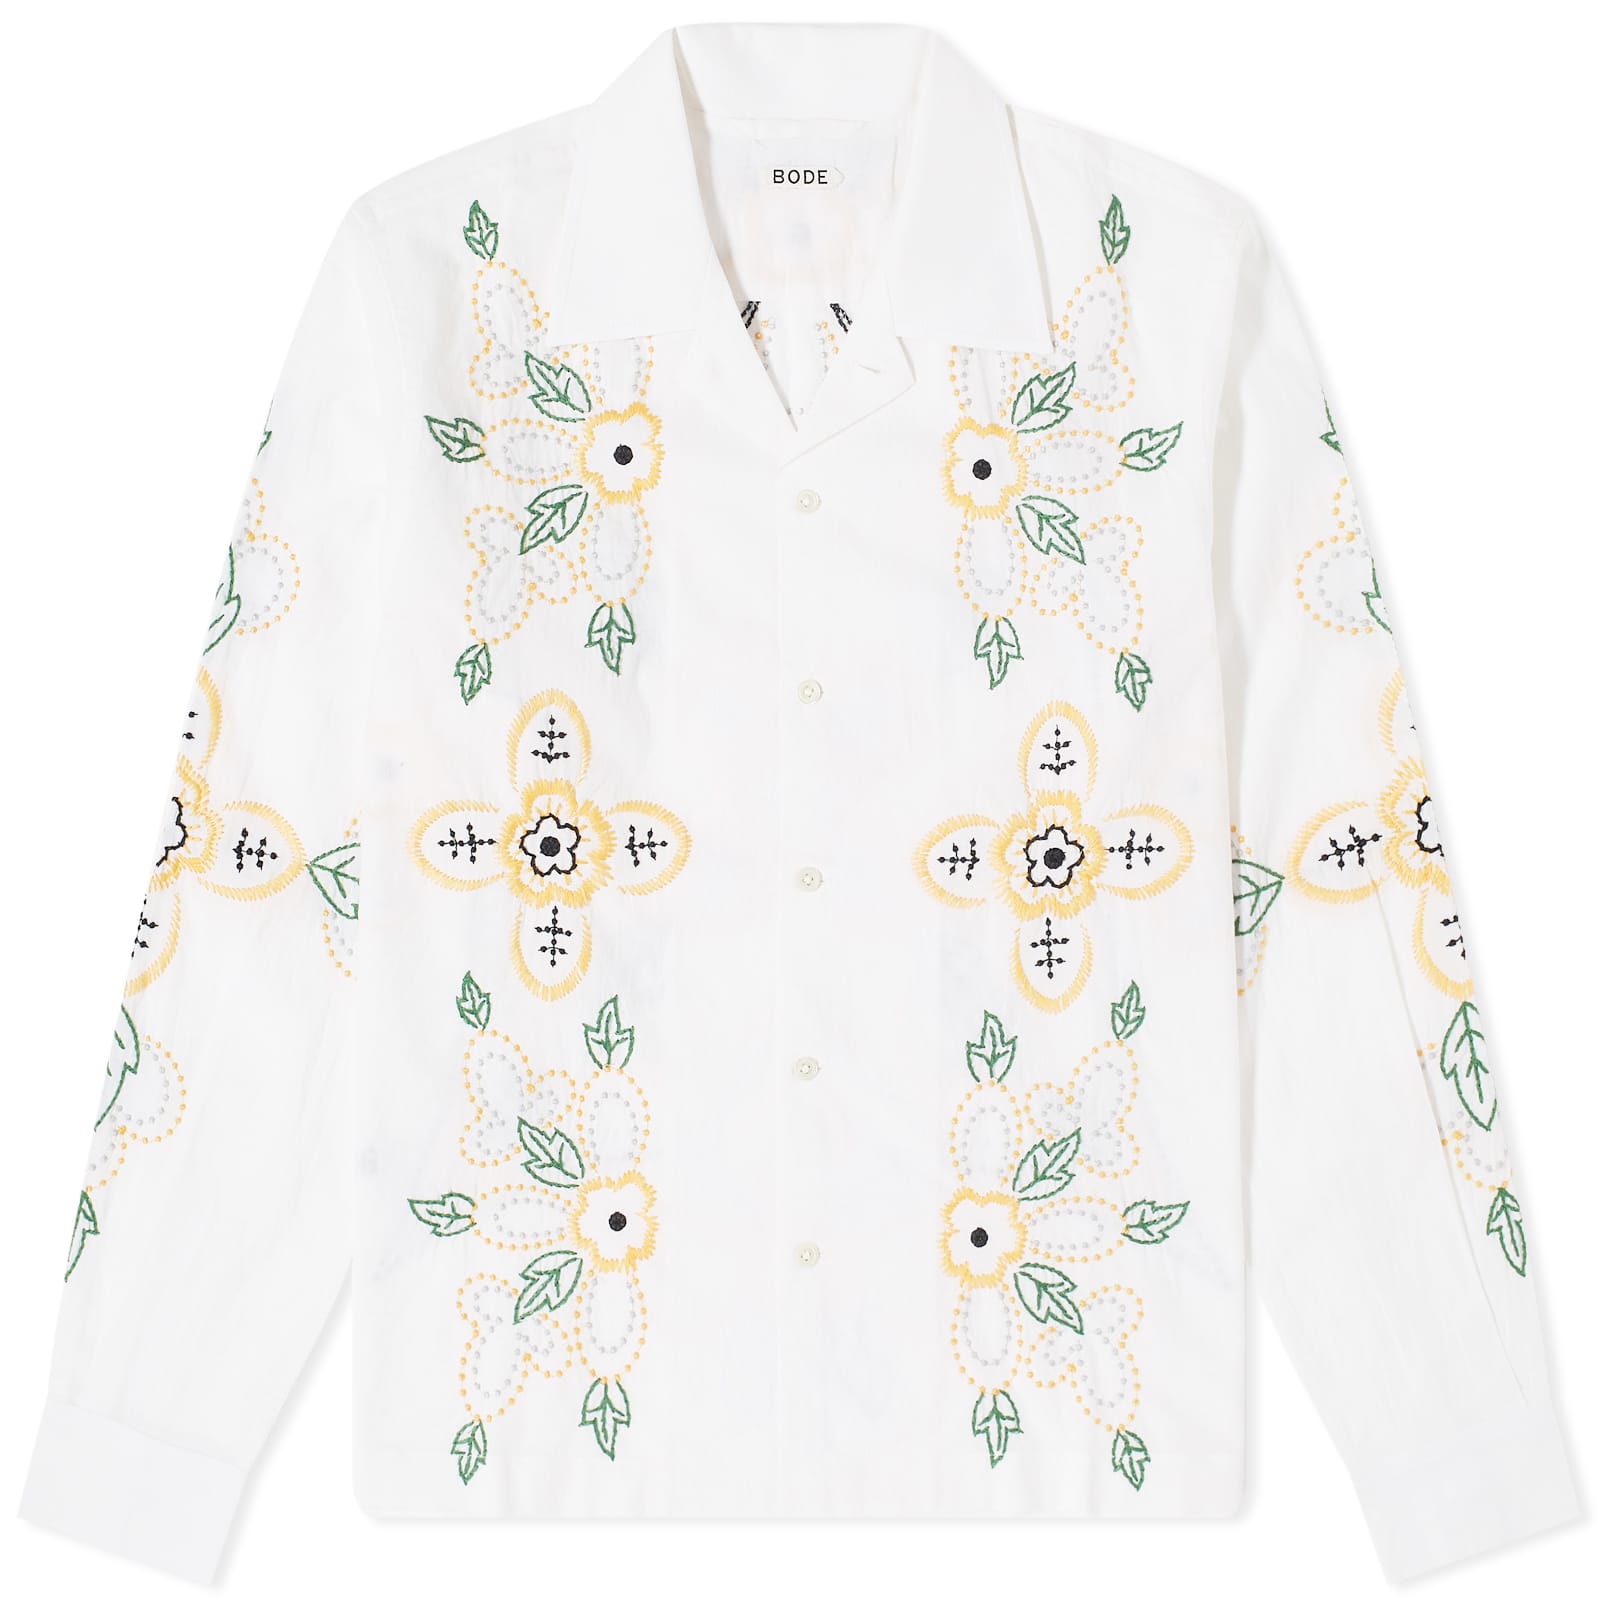 Рубашка Bode Embroidered Buttercup, белый рубашка officine generale eren bubble print vacation shirt